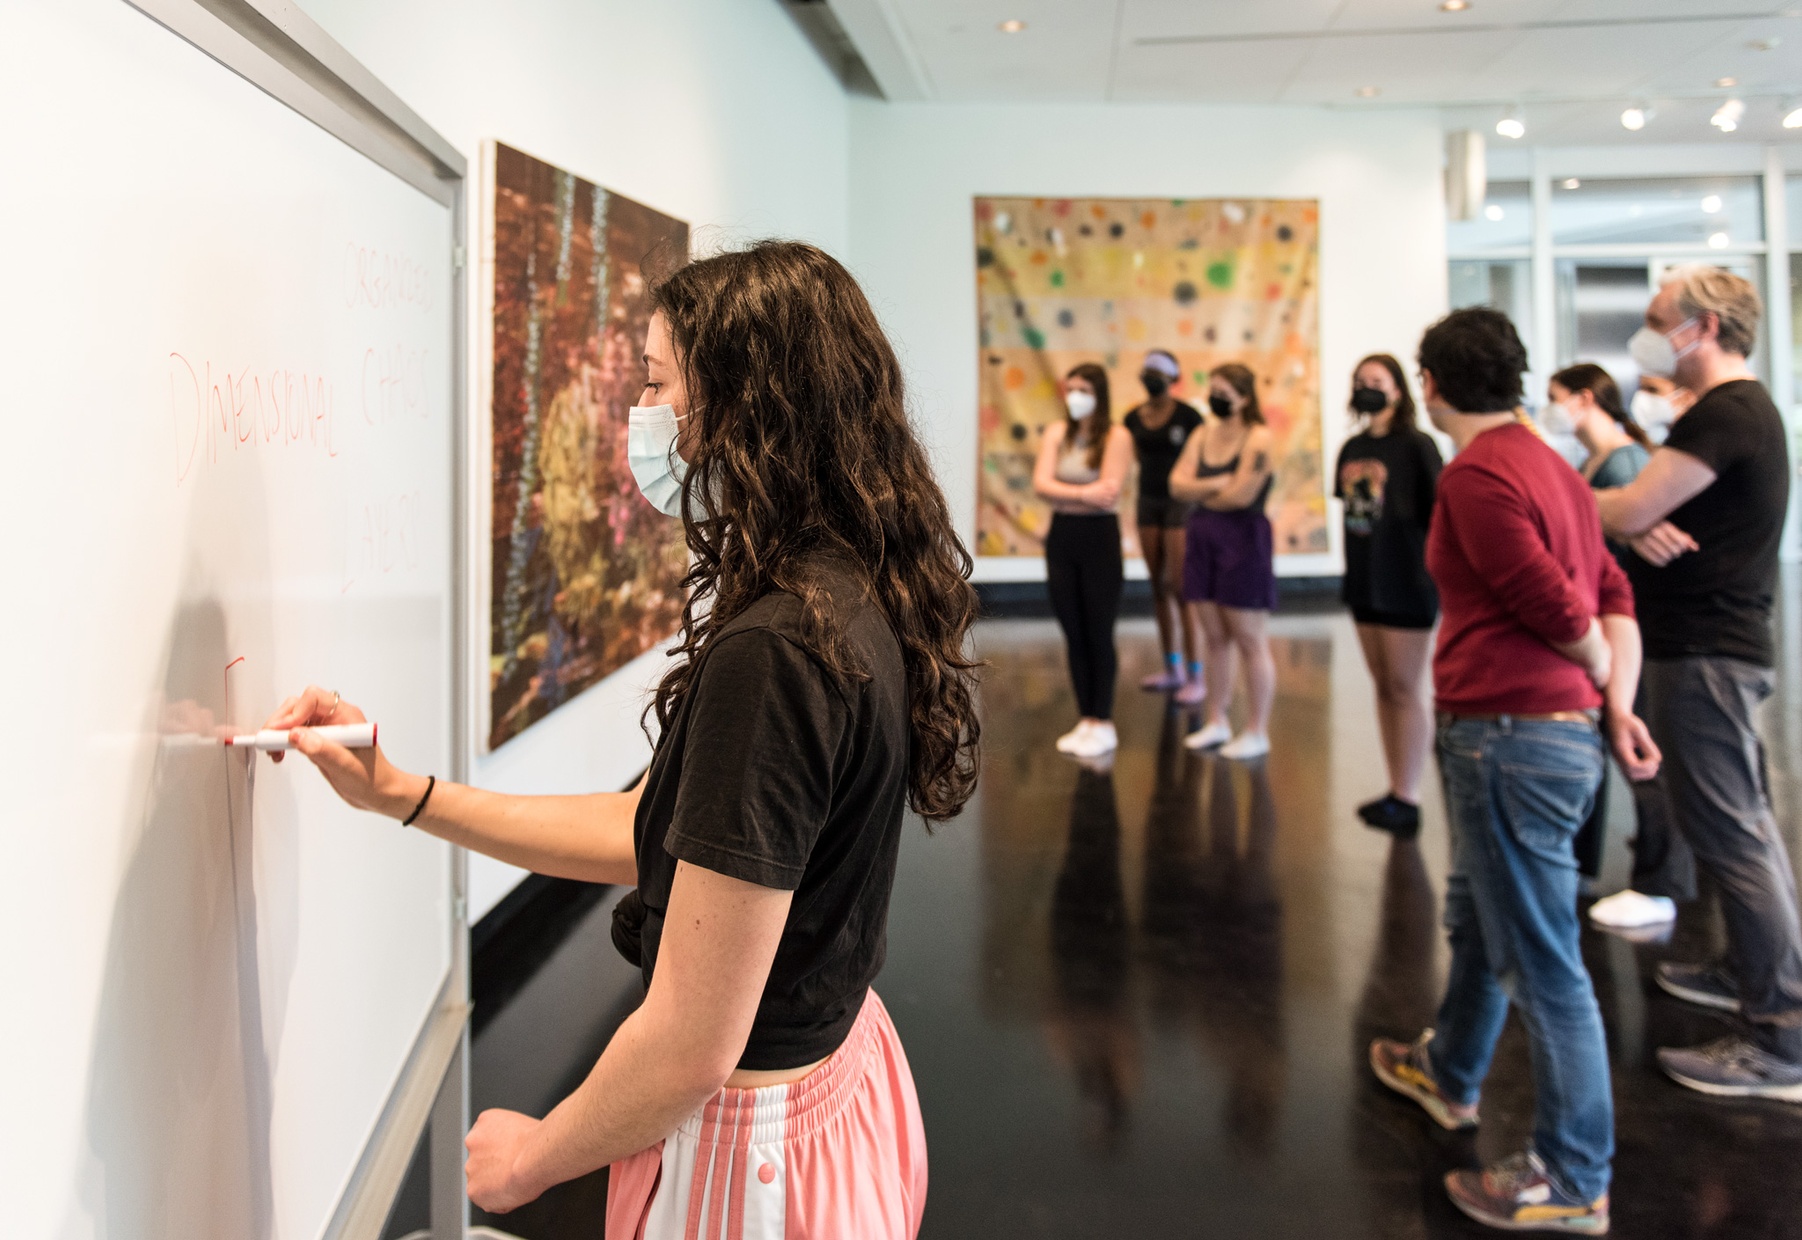 A masked young woman writes on a white board while a group of people look at an abstract painting behind her.